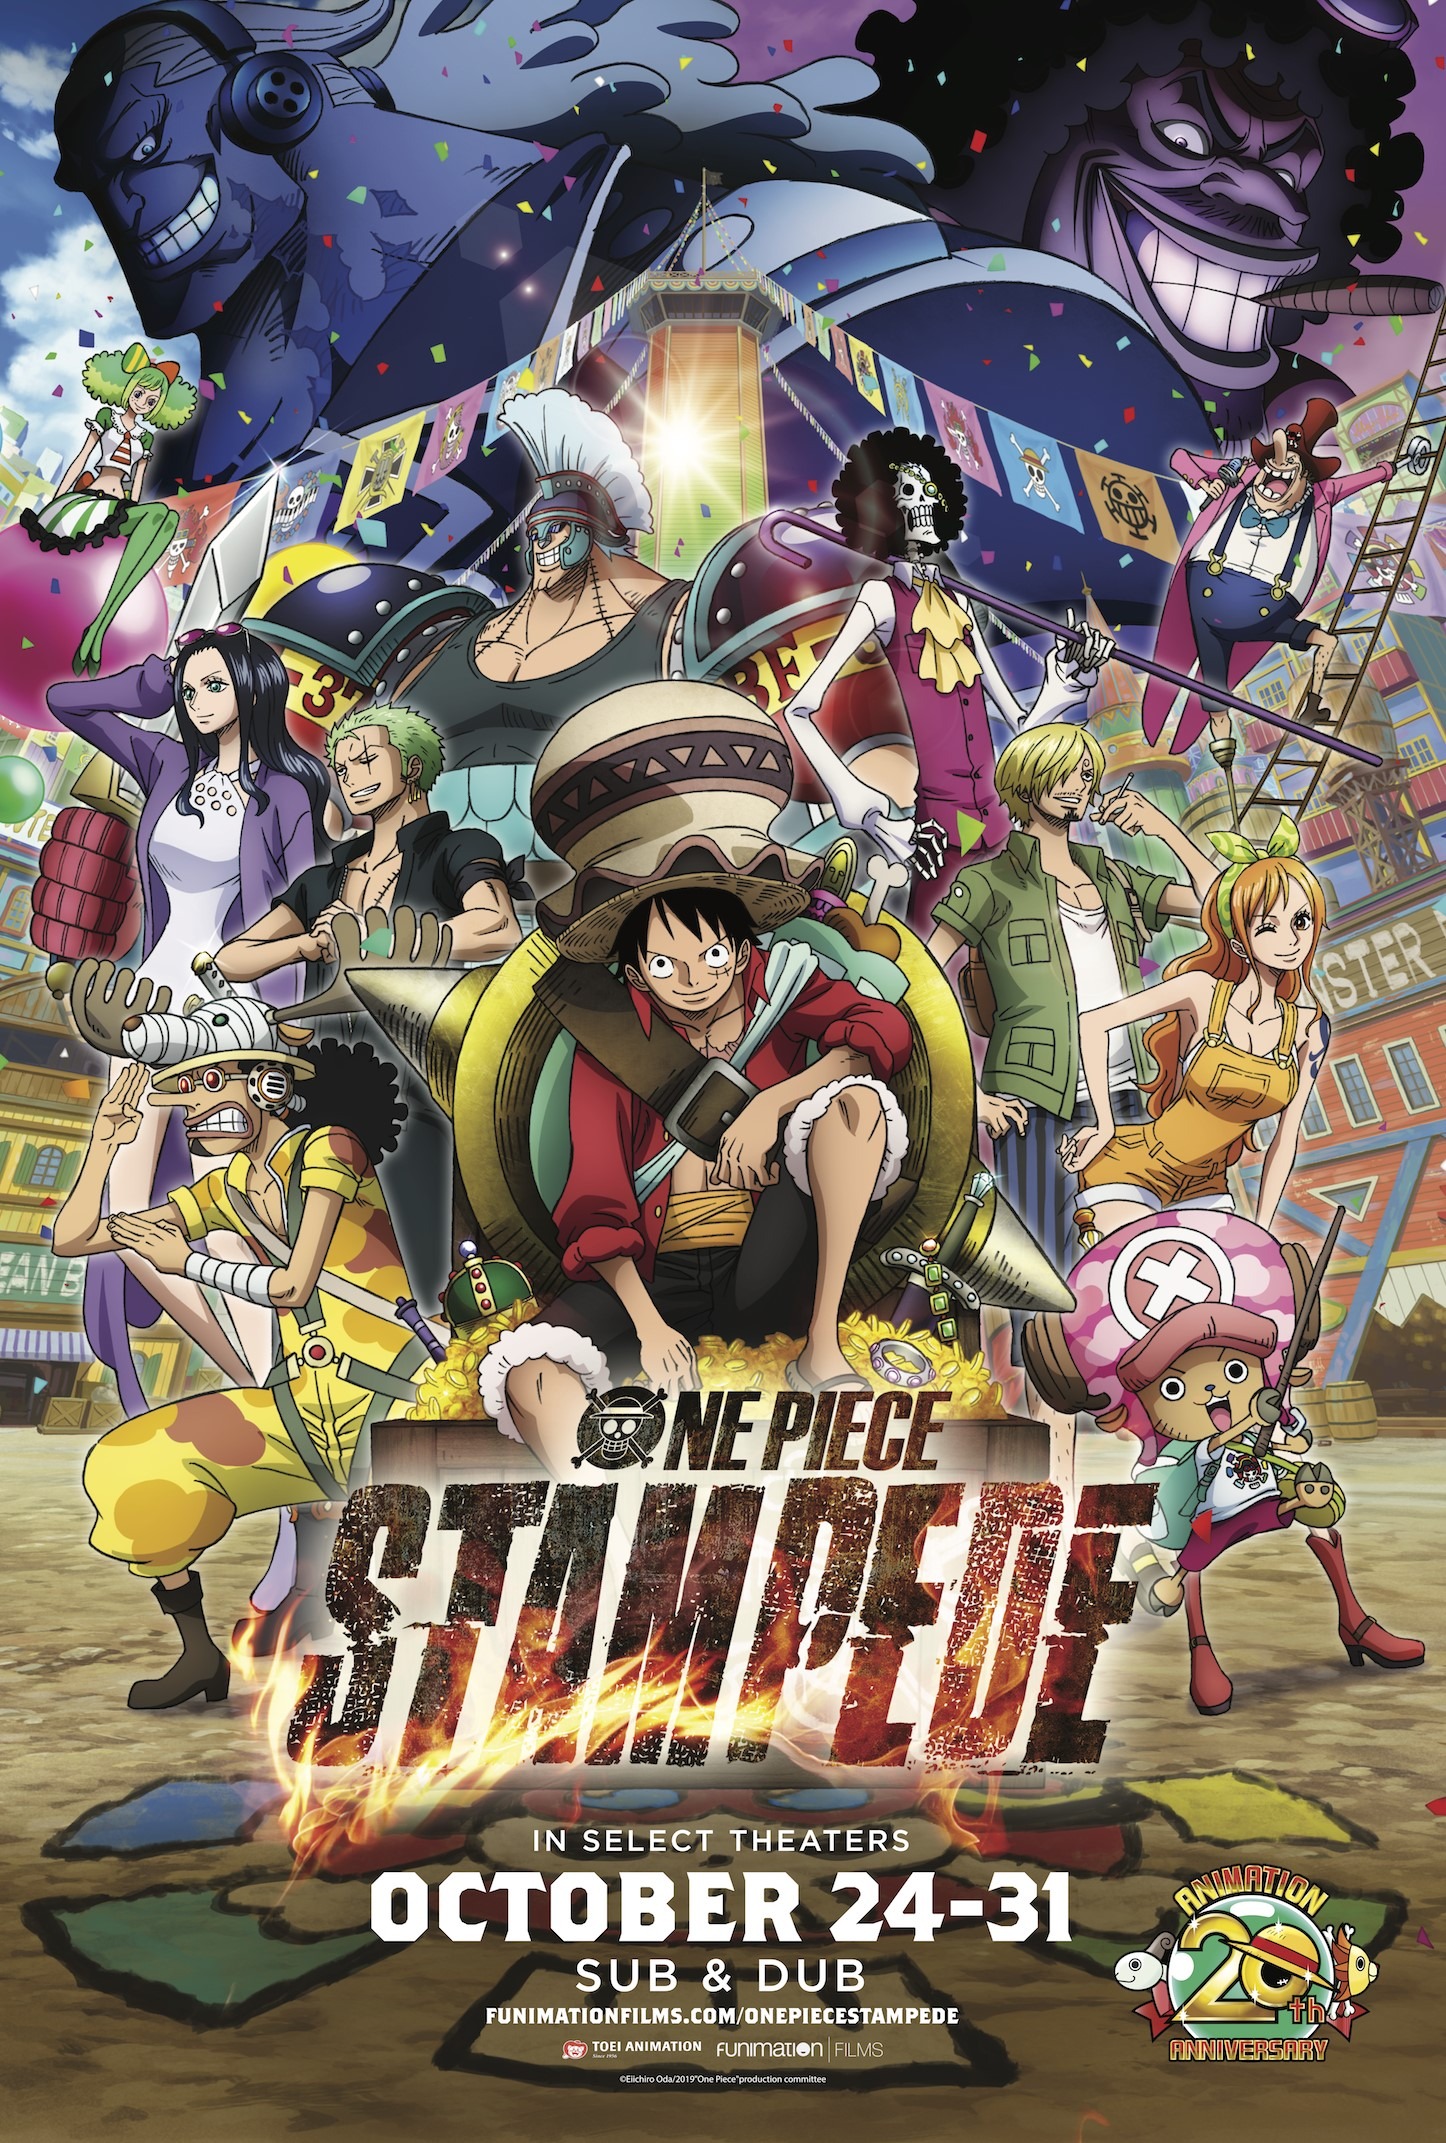 Mega Sized Movie Poster Image for One Piece: Stampede 